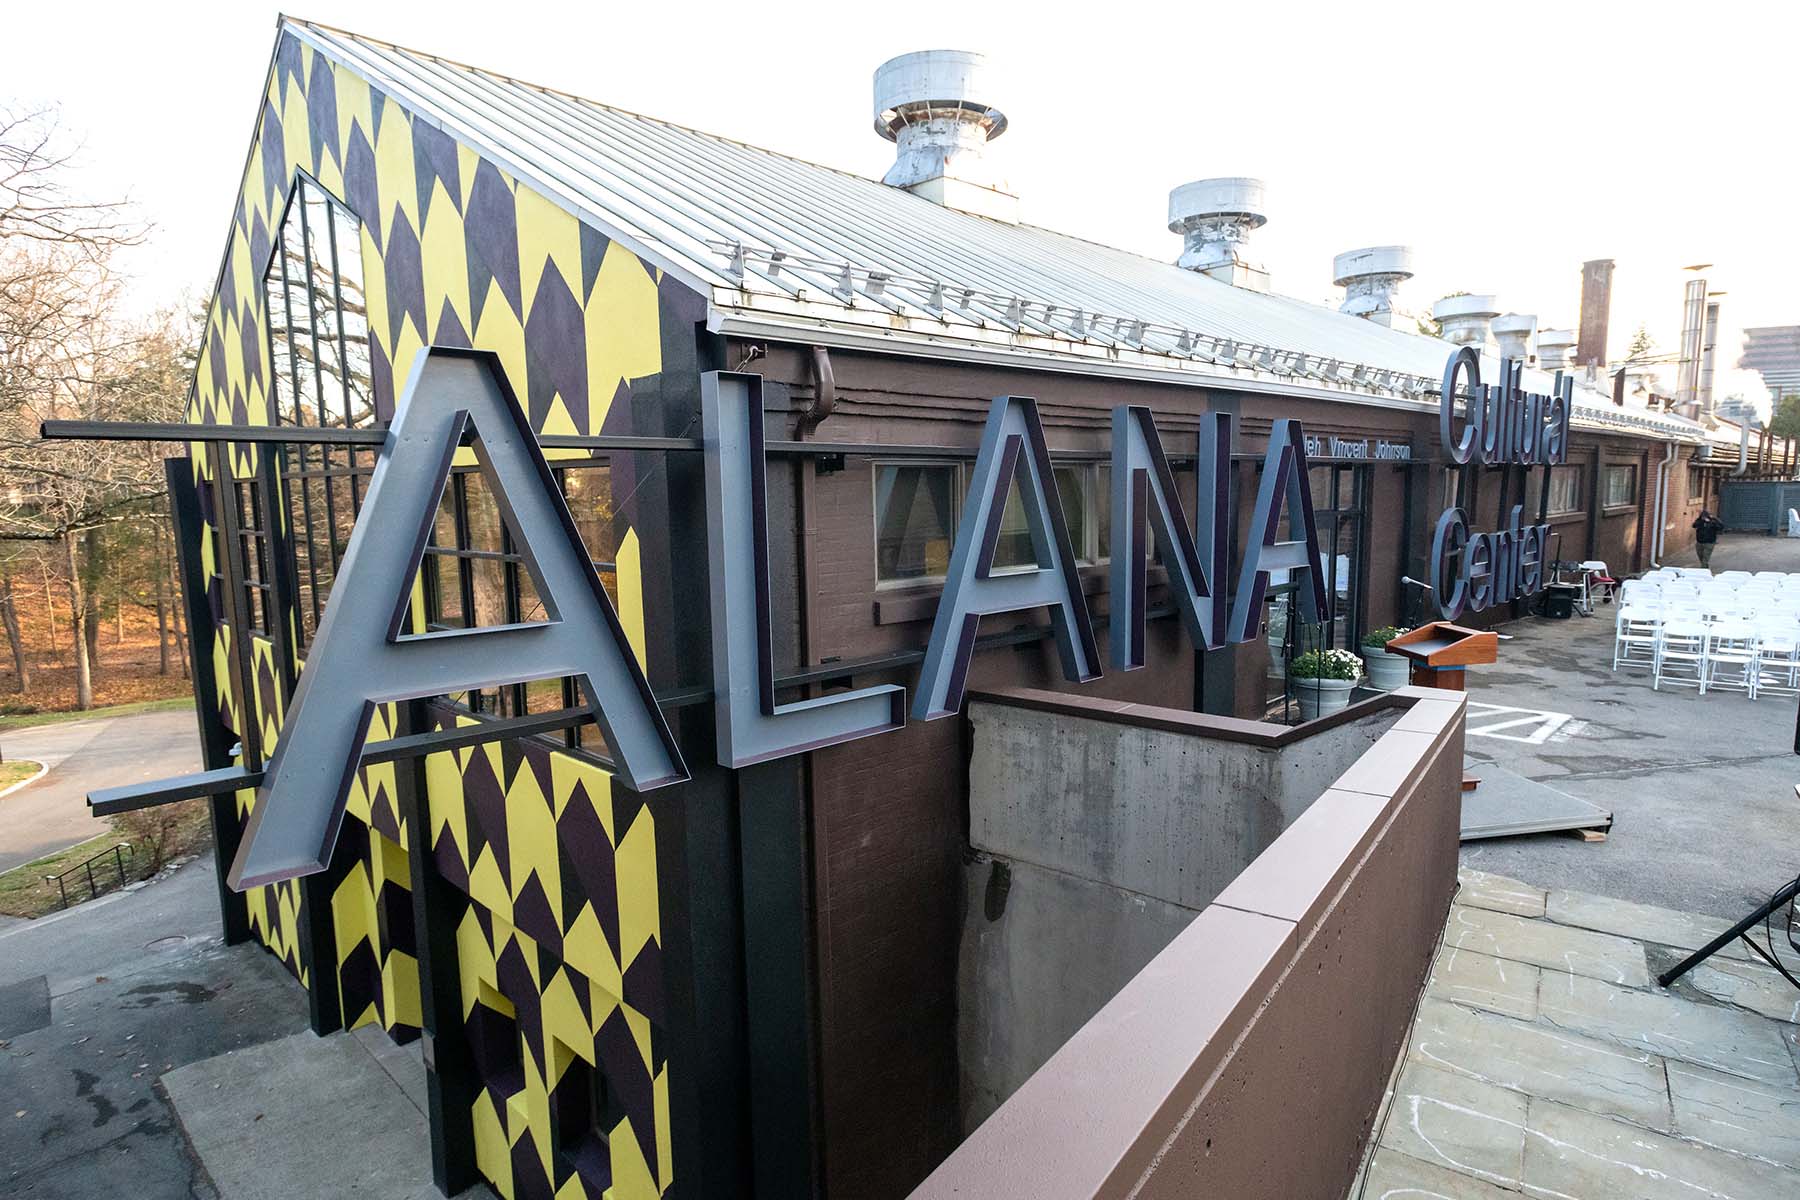 ALANA Center’s new façade features bold lettering